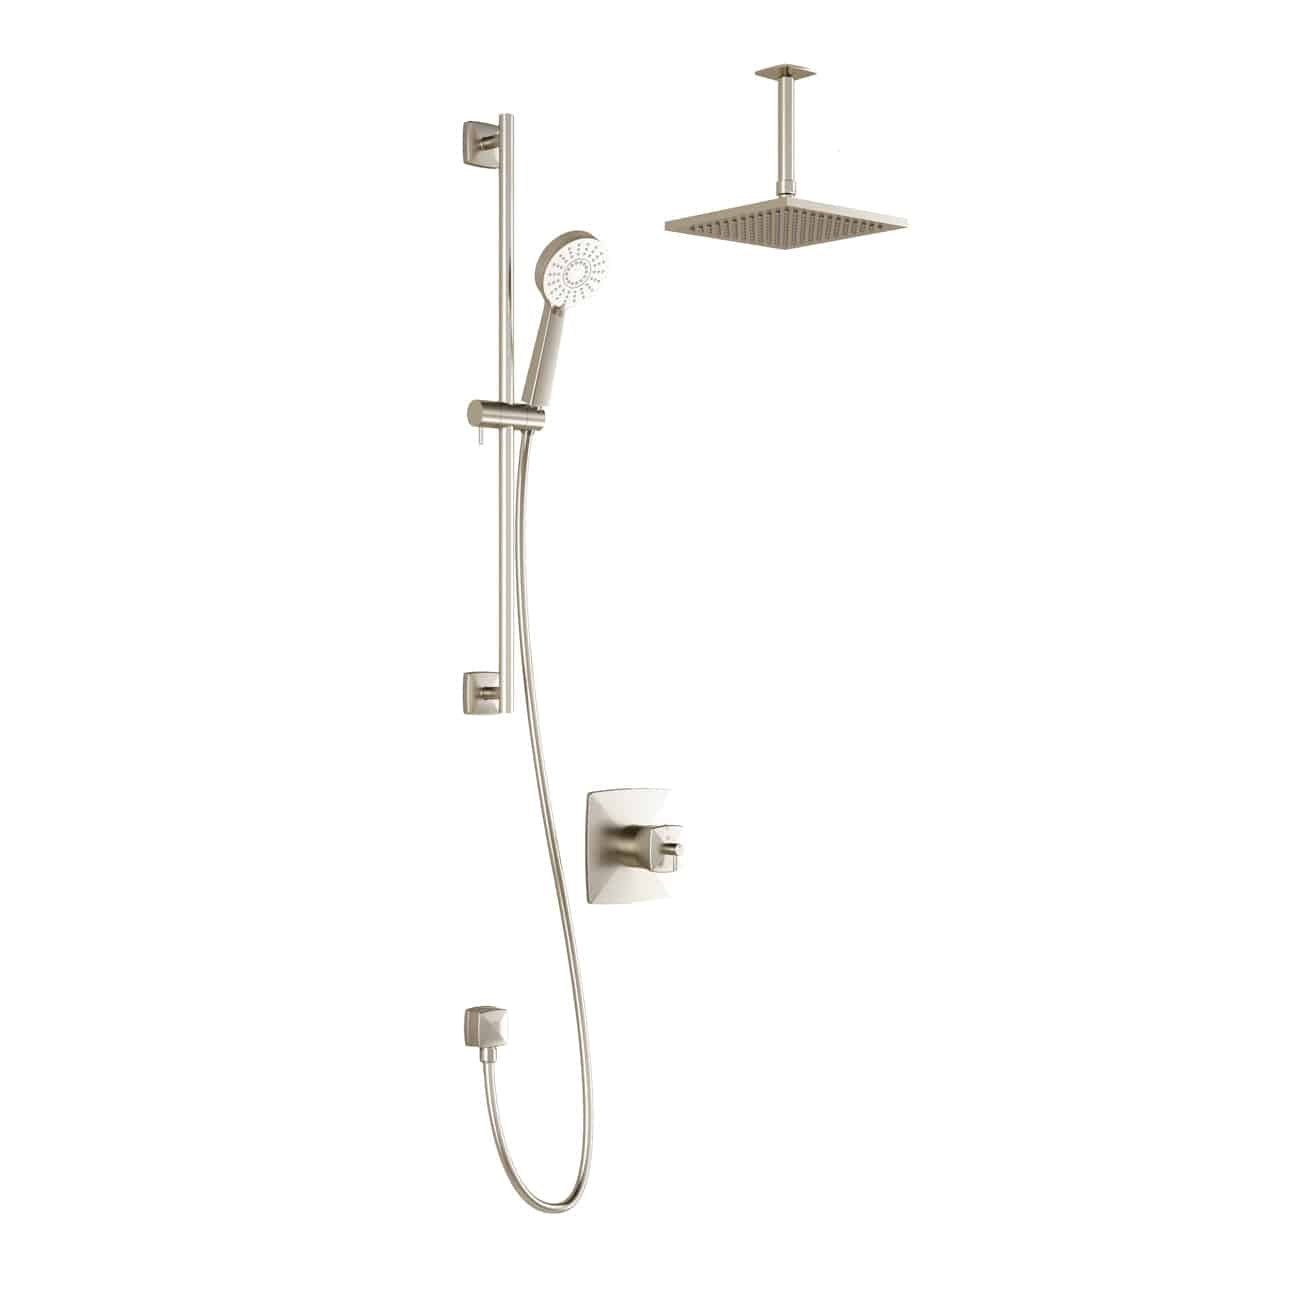 Kalia UMANI TCD1 (Valve Not Included) AQUATONIK T/P Coaxial Shower System with Vertical Ceiling Arm- Brushed Nickel PVD